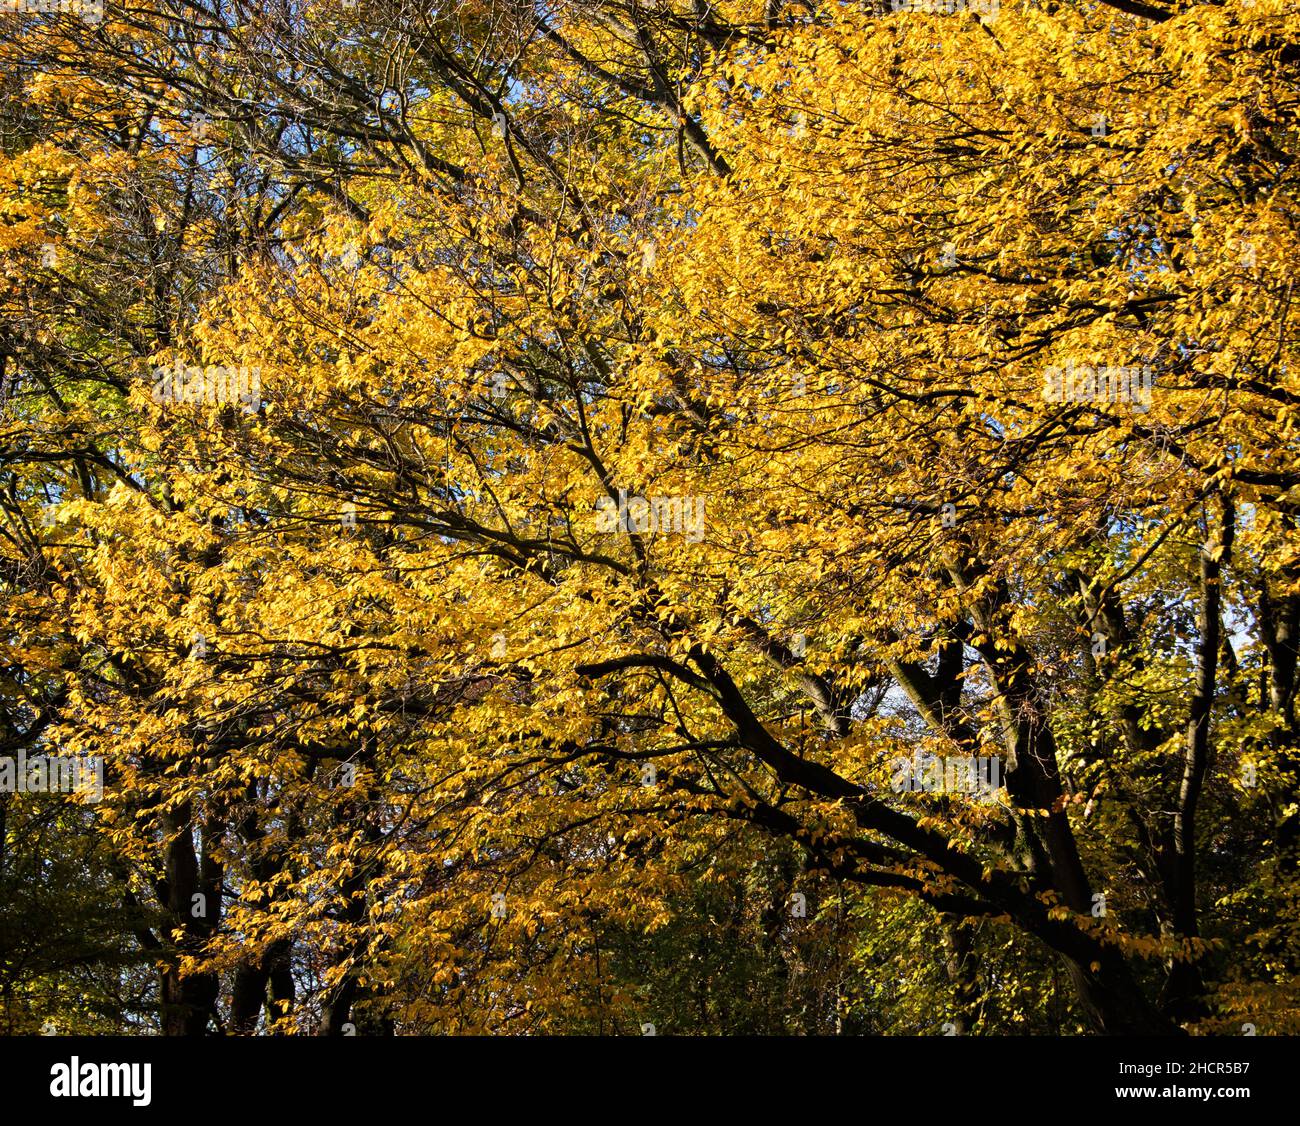 Golden leaves on an abstract section of a tree in autumn Stock Photo